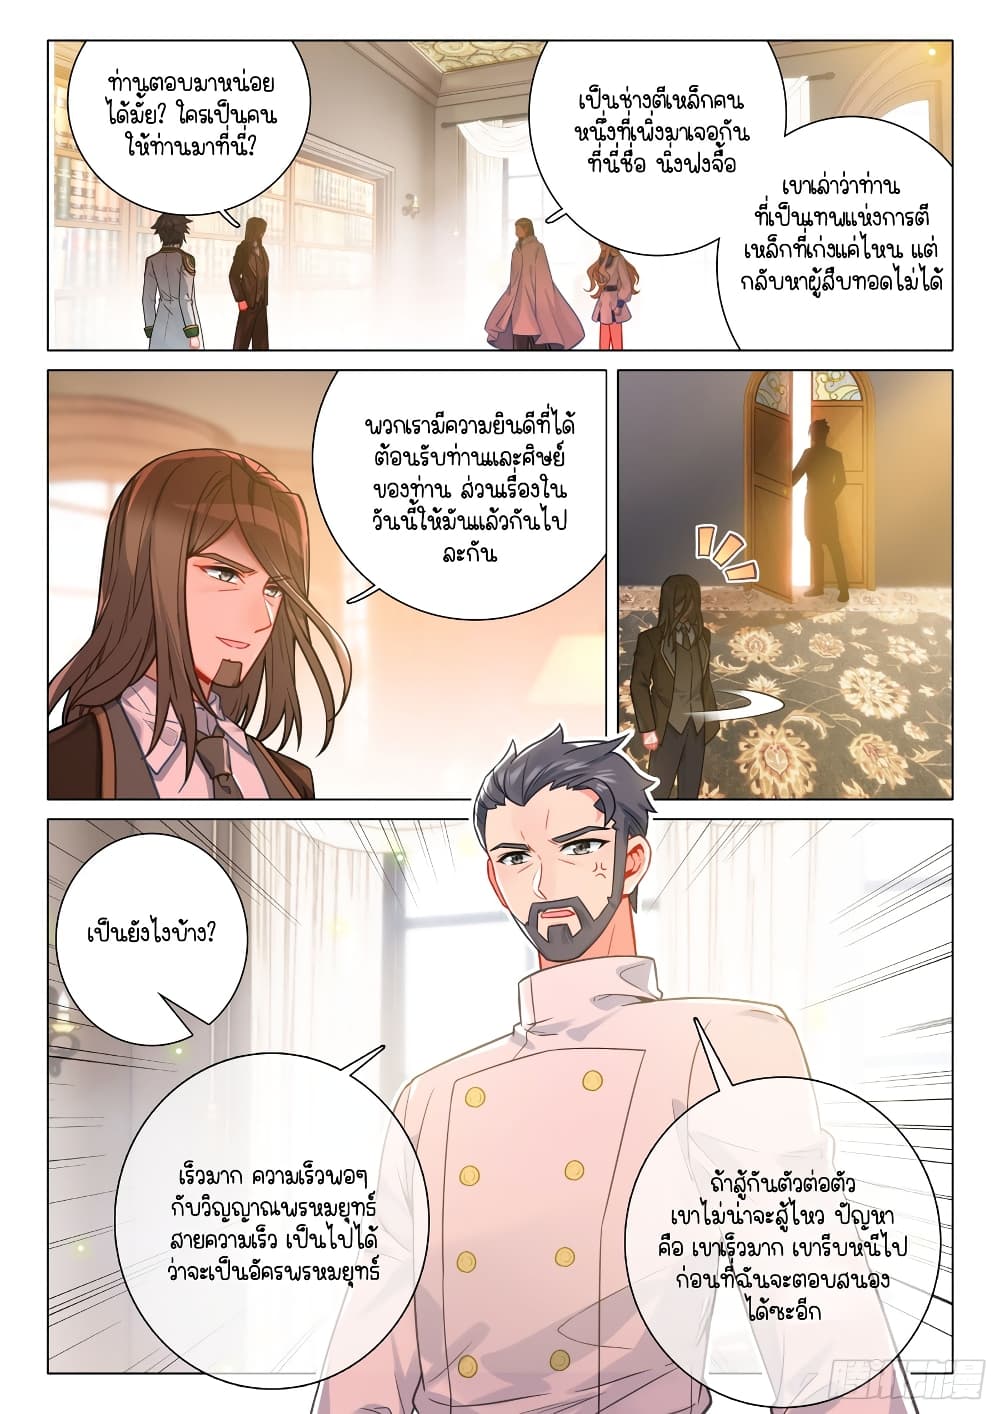 Douluo Dalu 3: The Legend of the Dragon King 297-อุบัติเหตุ